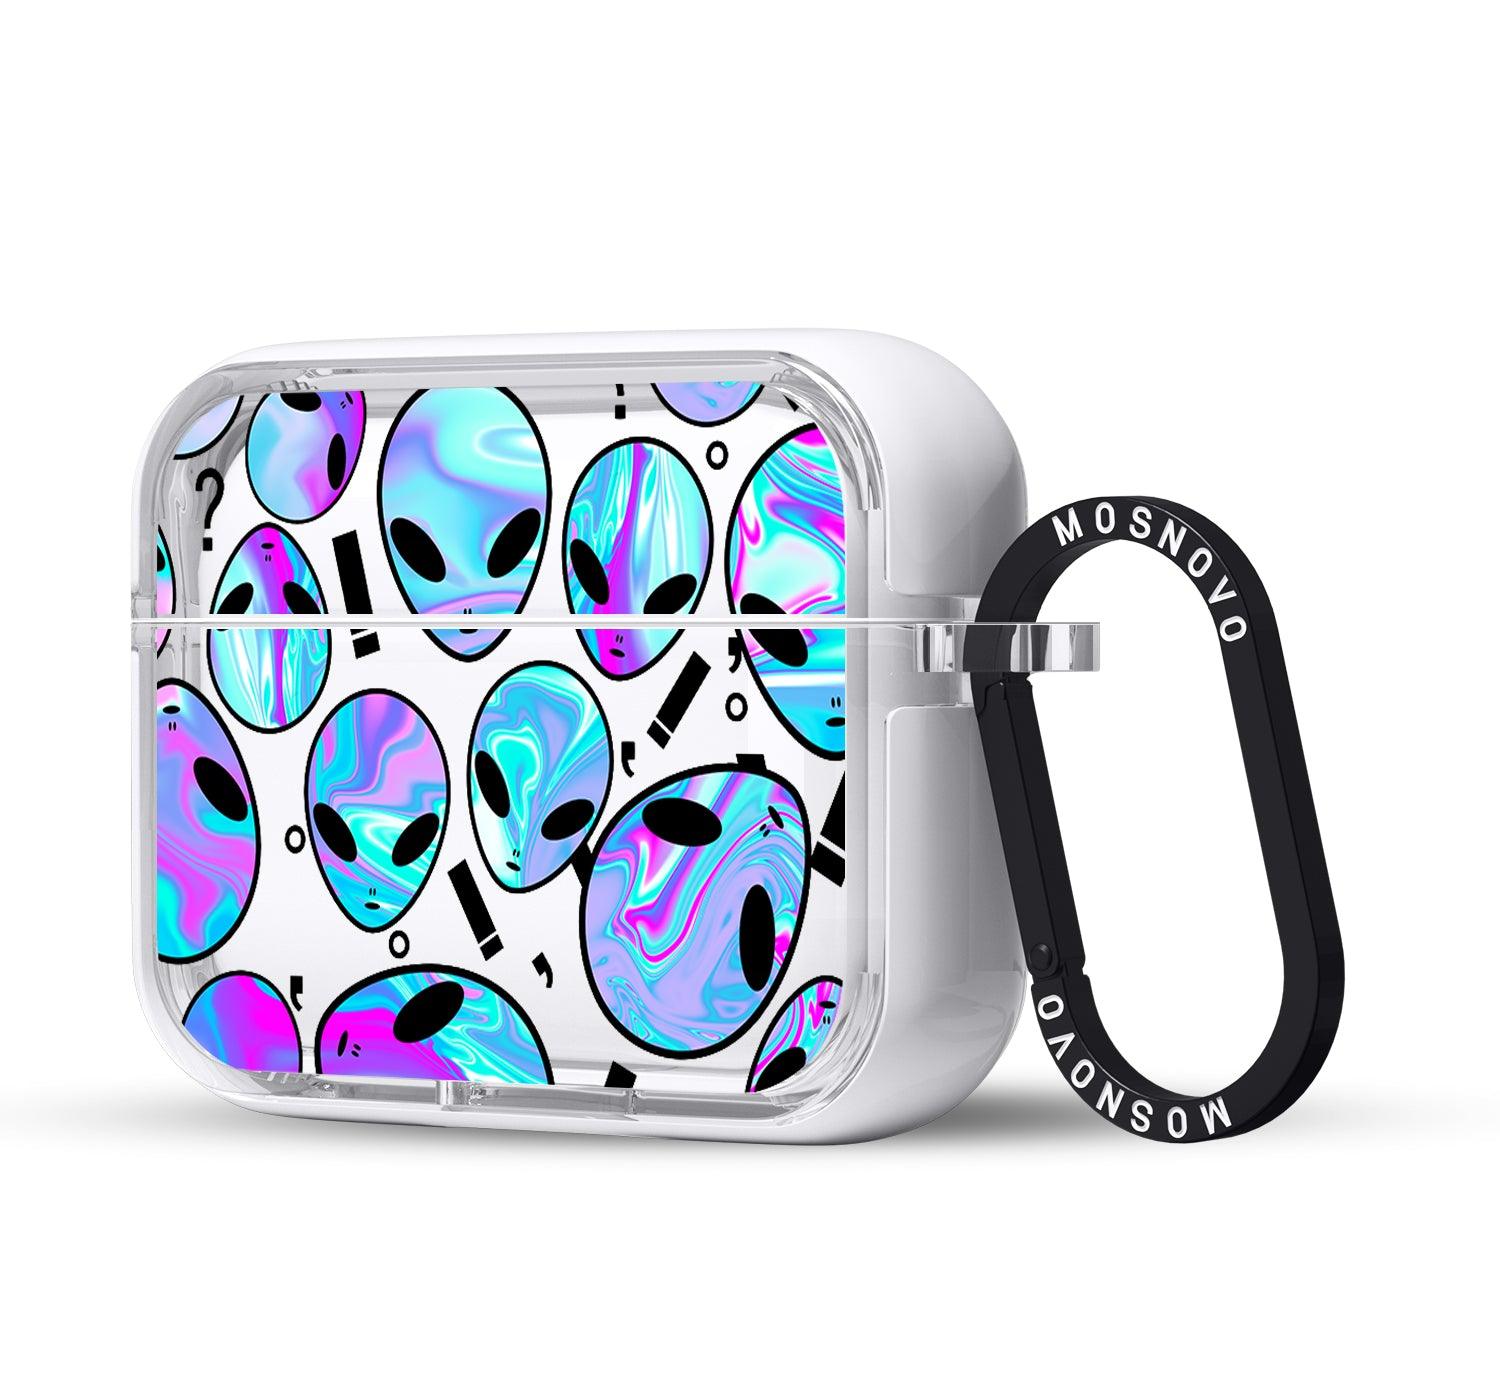 Alien AirPods Pro 2 Case (2nd Generation) - MOSNOVO